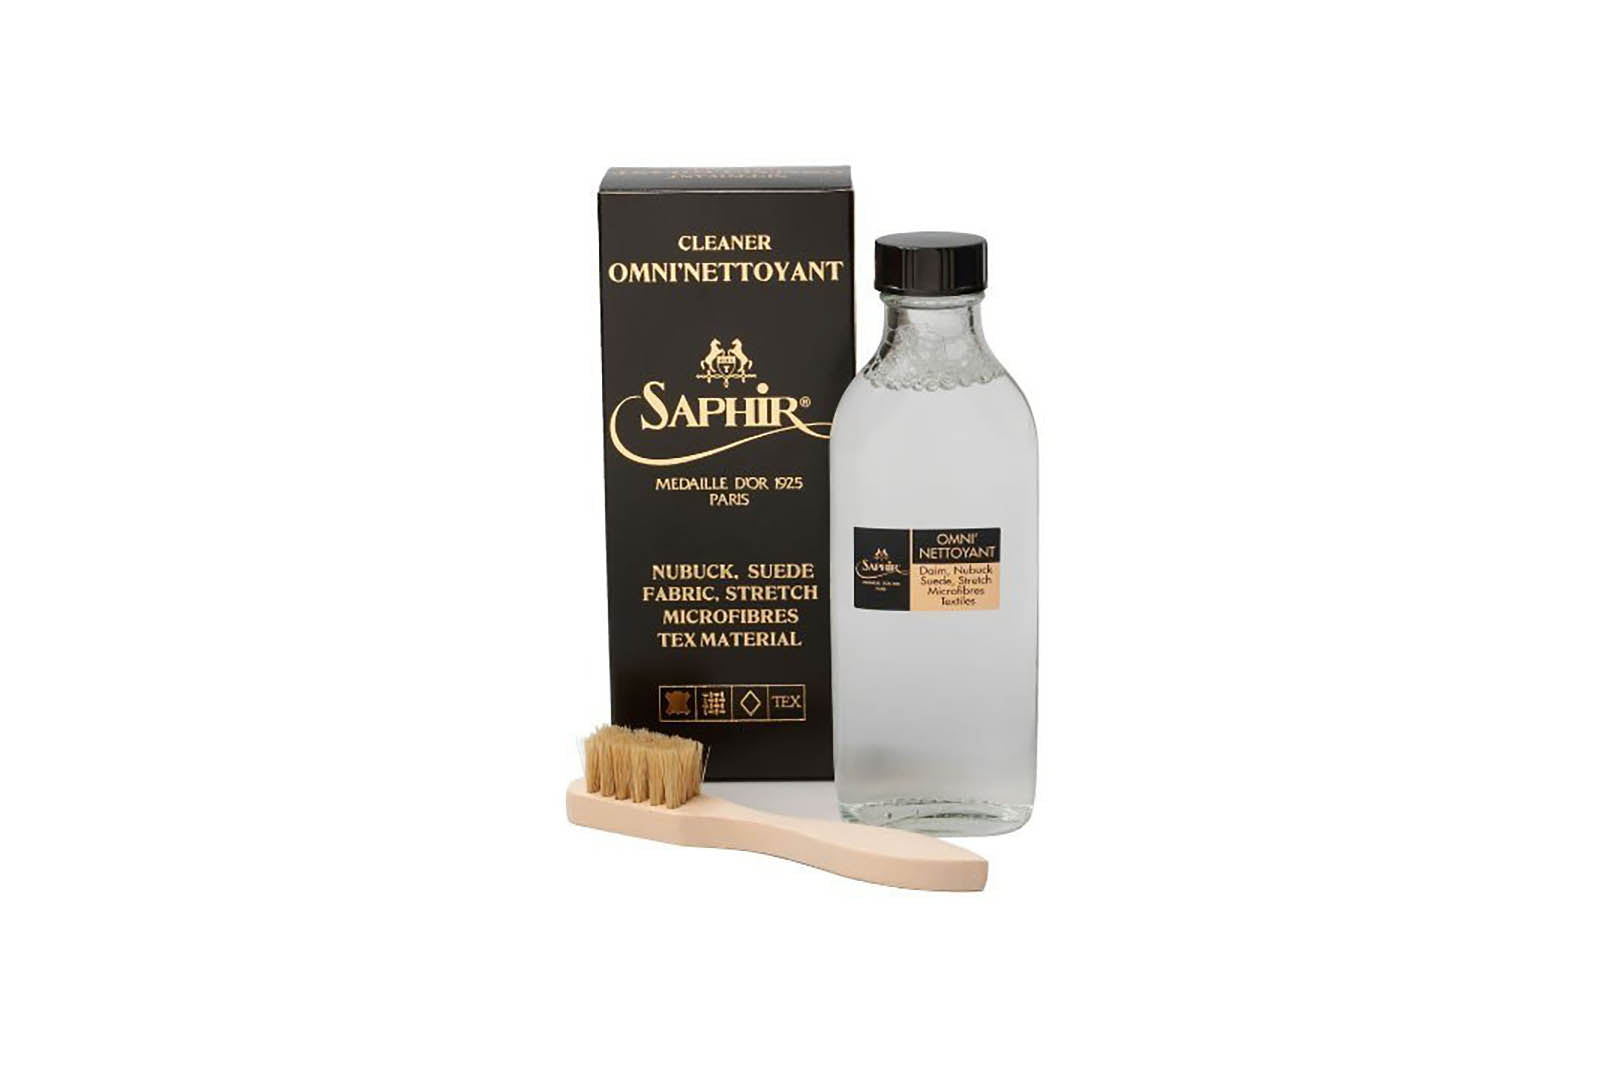 Omni-Nettoyant Suede Multicleaner 100ml - Saphir Médaille d'Or 1925 - Bootblack